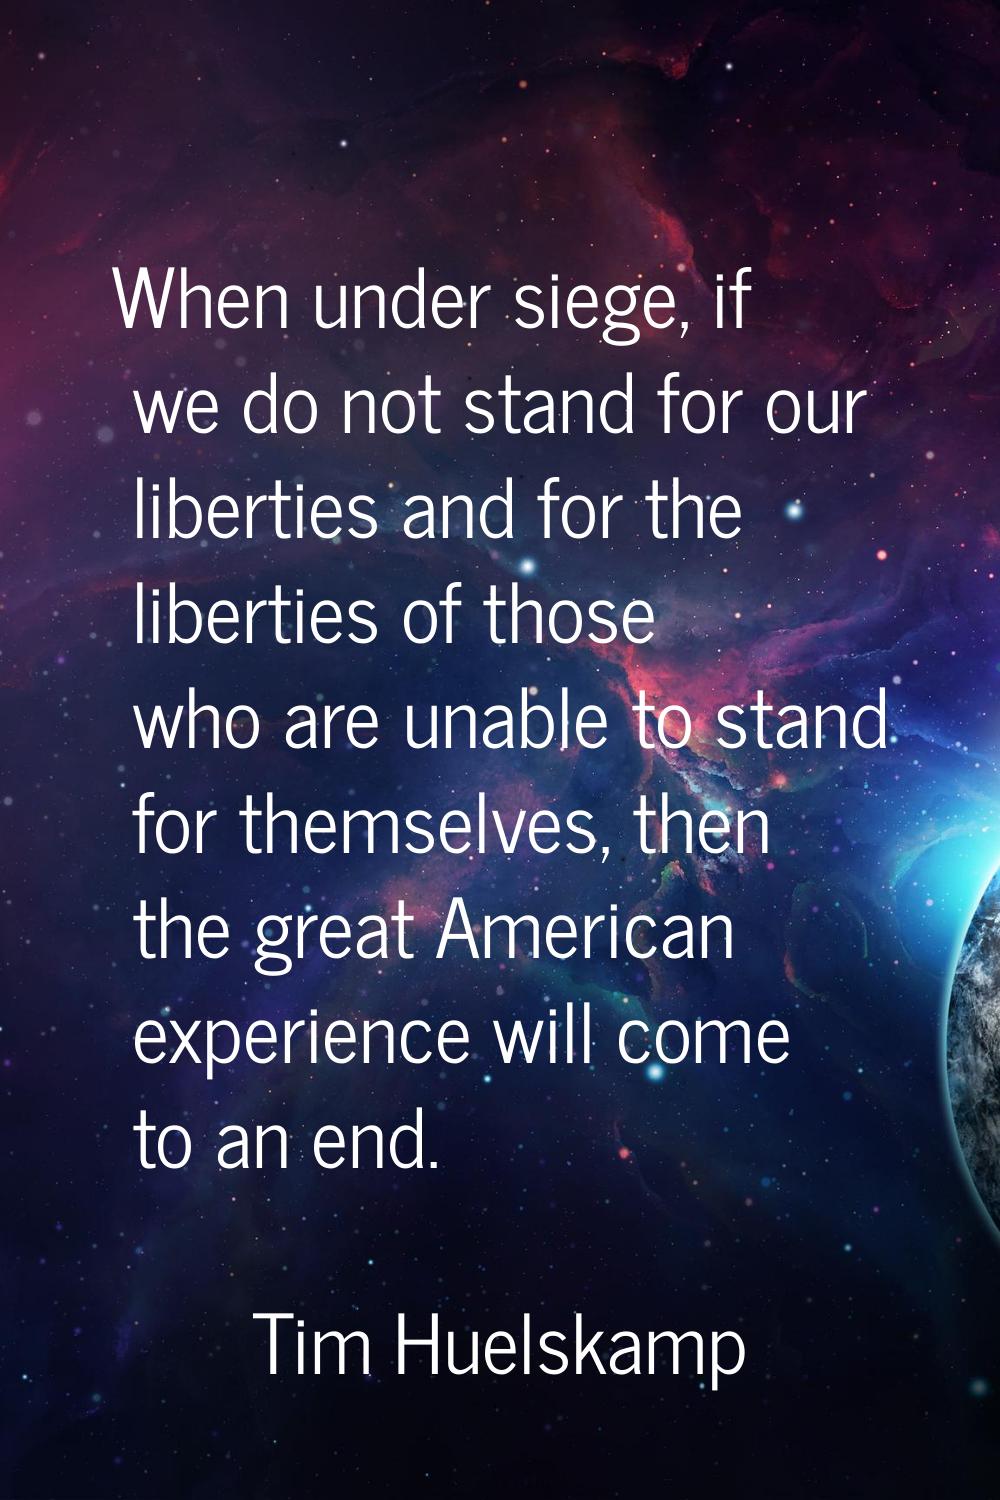 When under siege, if we do not stand for our liberties and for the liberties of those who are unabl